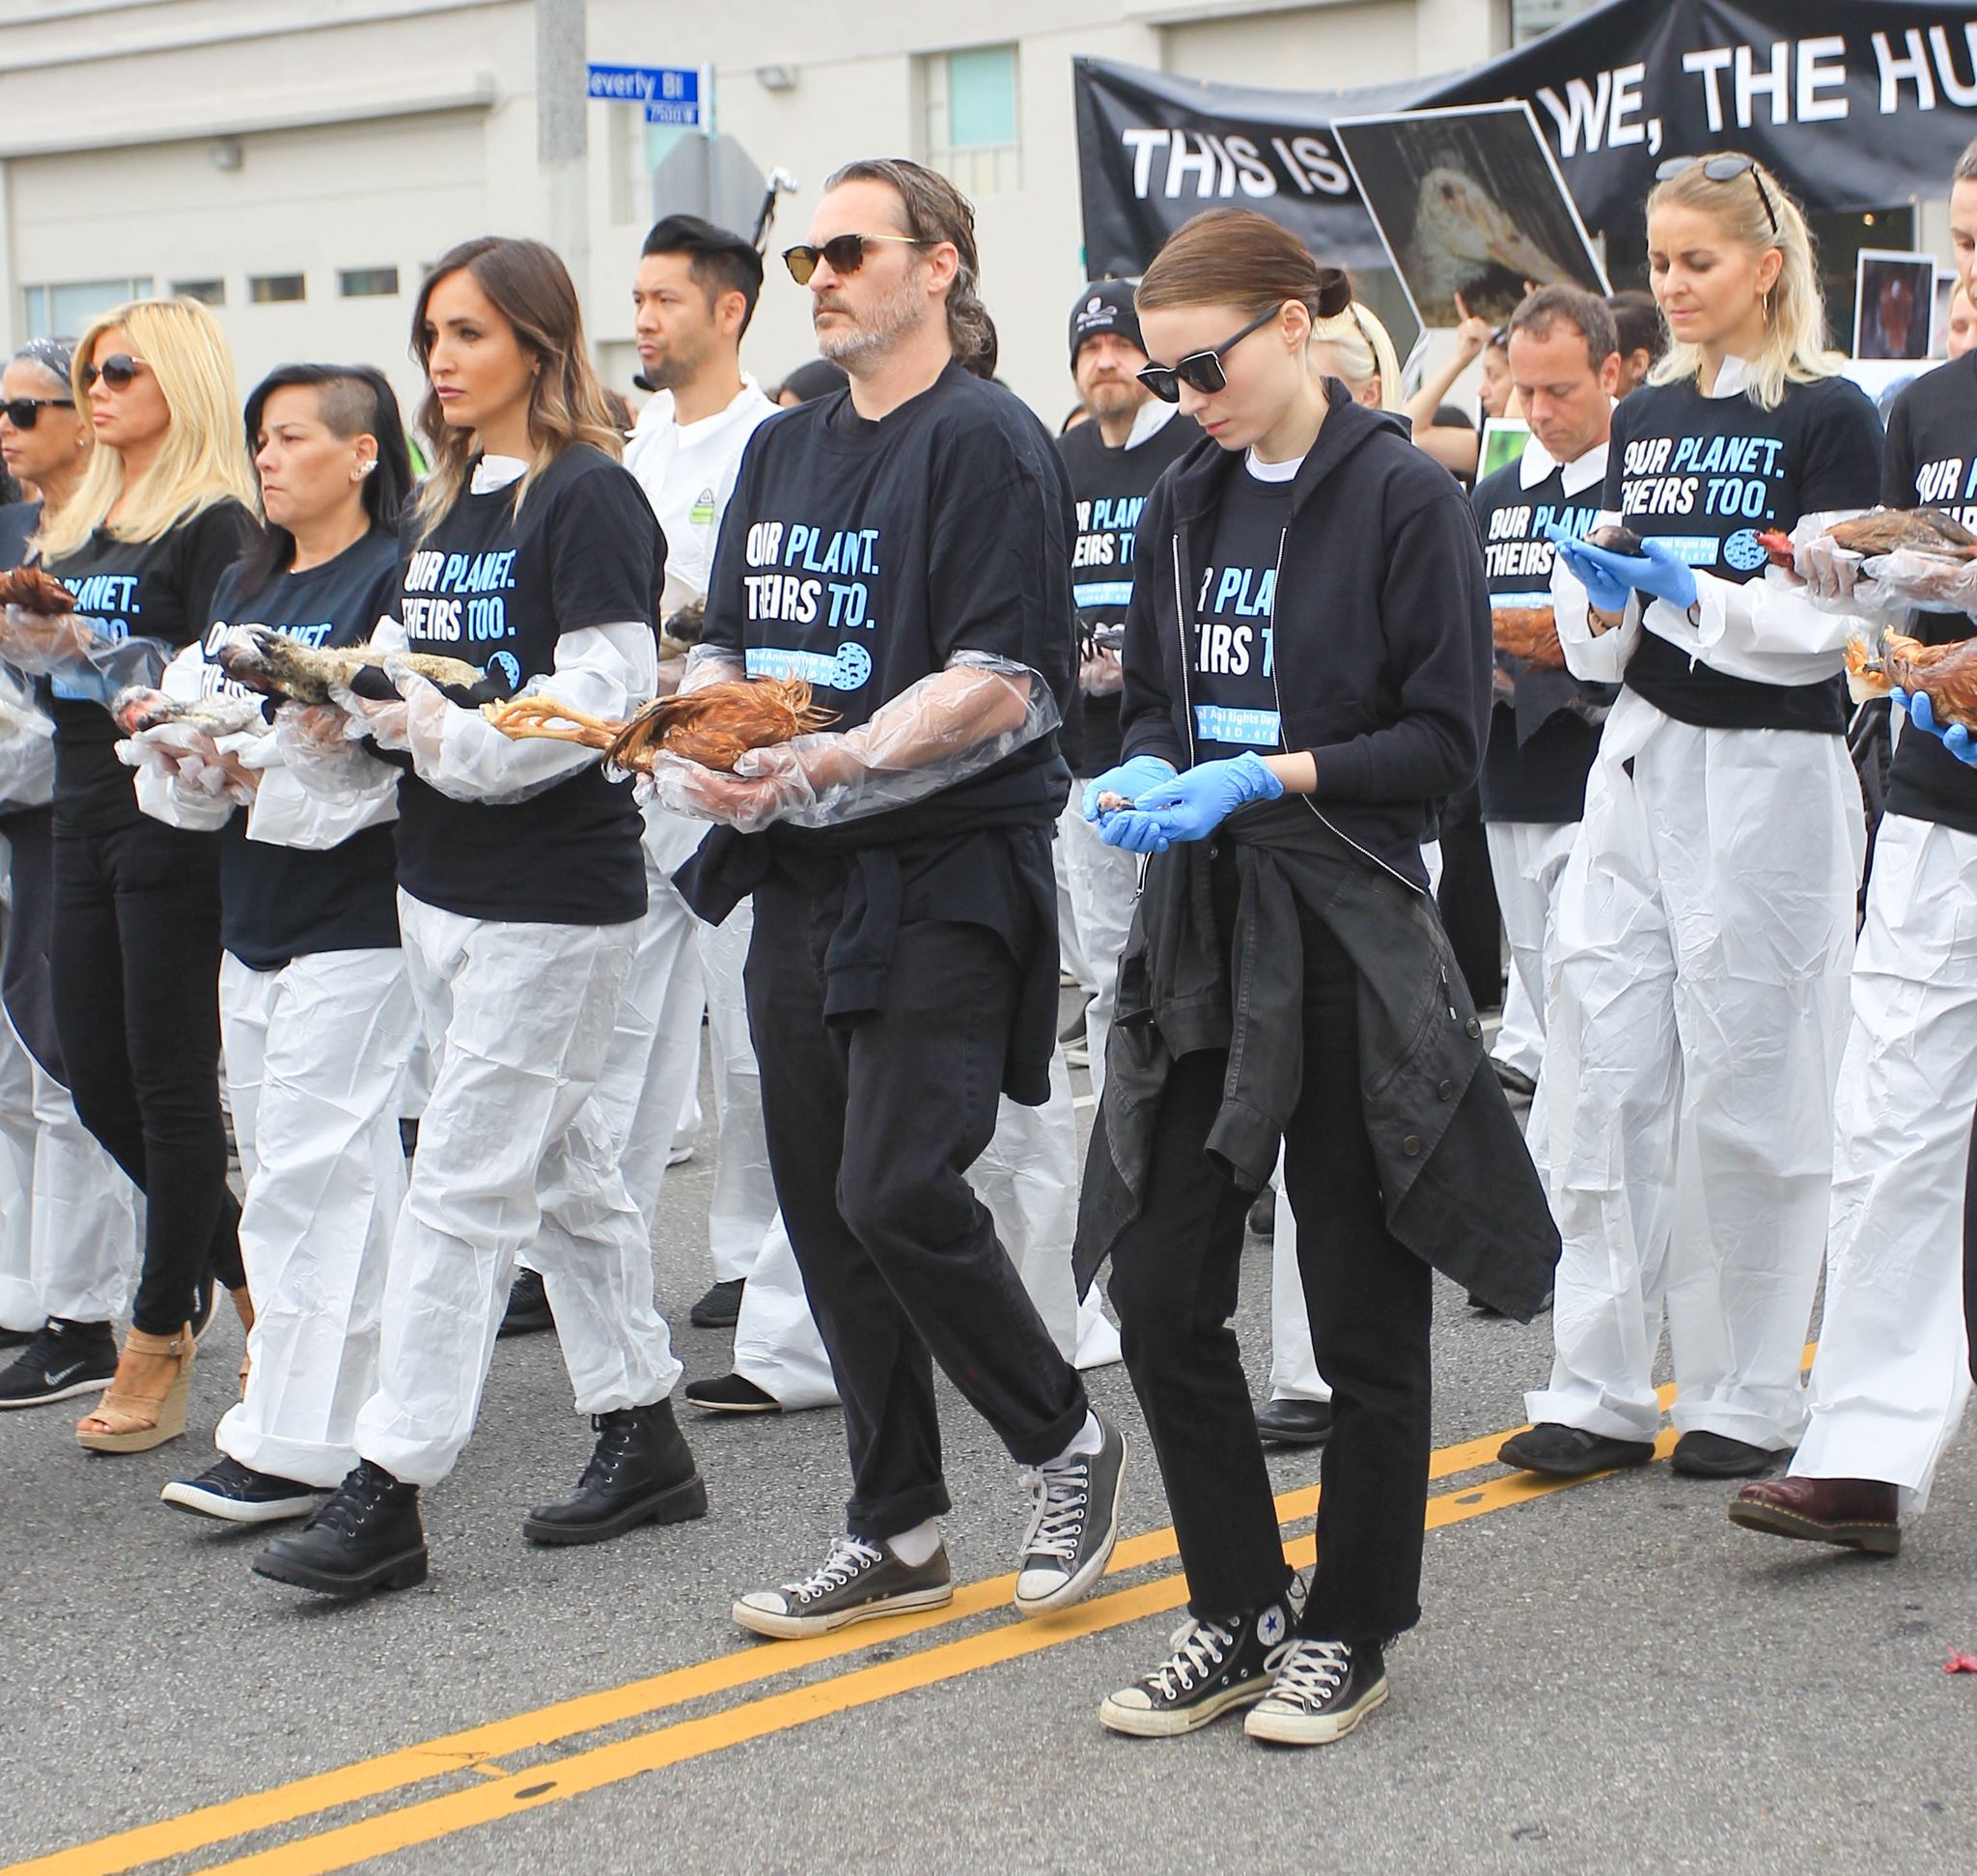 los angeles, ca   june 02 joaquin phoenix and rooney mara lead a procession for national animal rights day on june 2, 2019 in los angeles, california  photo by bg69bauer griffingc images